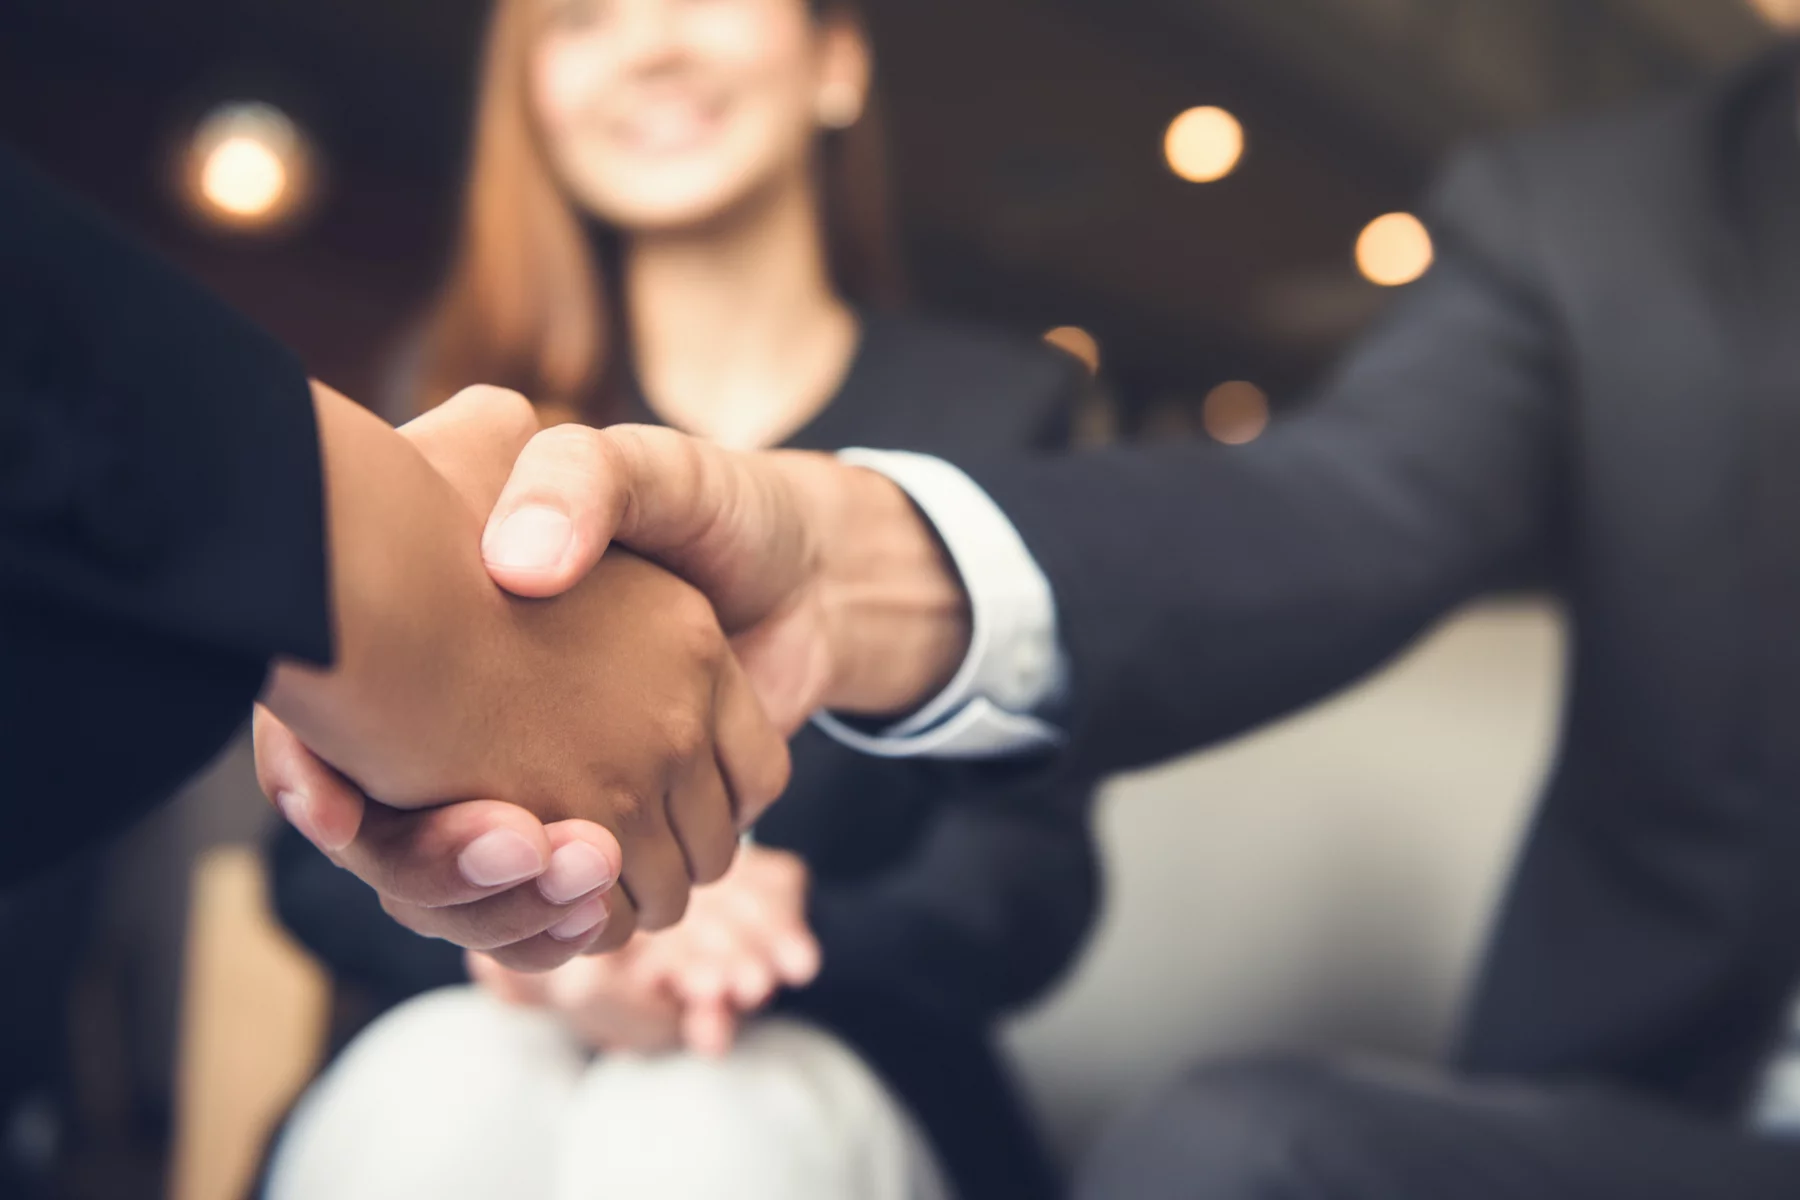 Handshake after a company merger